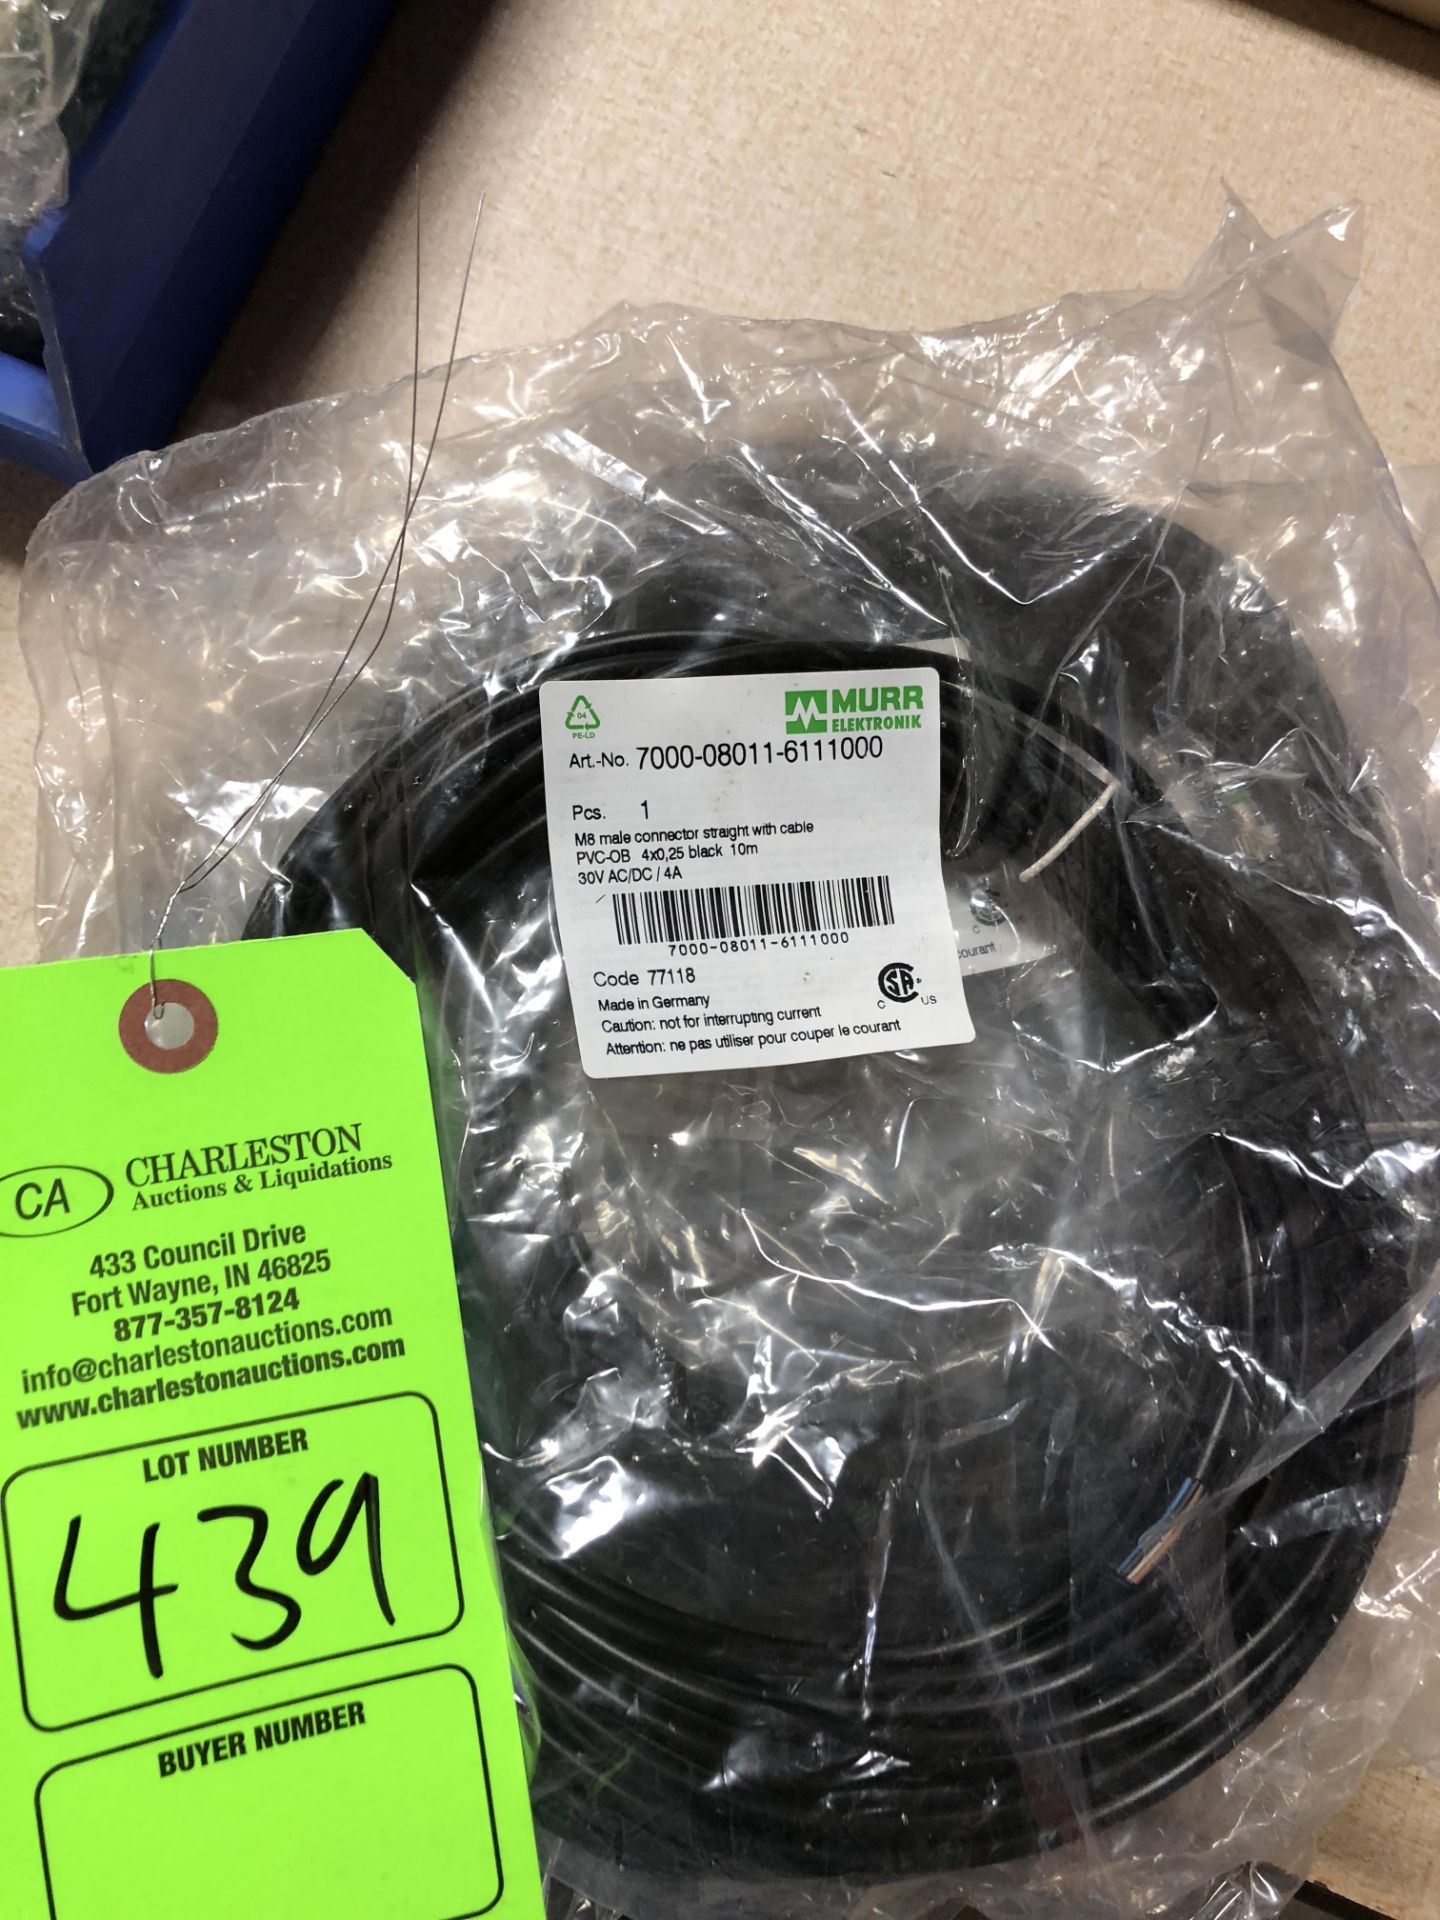 MURR ELEKTRONIK MODEL-7000-08011-611000 M8 MULE CONNECTOR STRAIGHT W/ CABLE (LOCATED AT 2696 E LYTLE